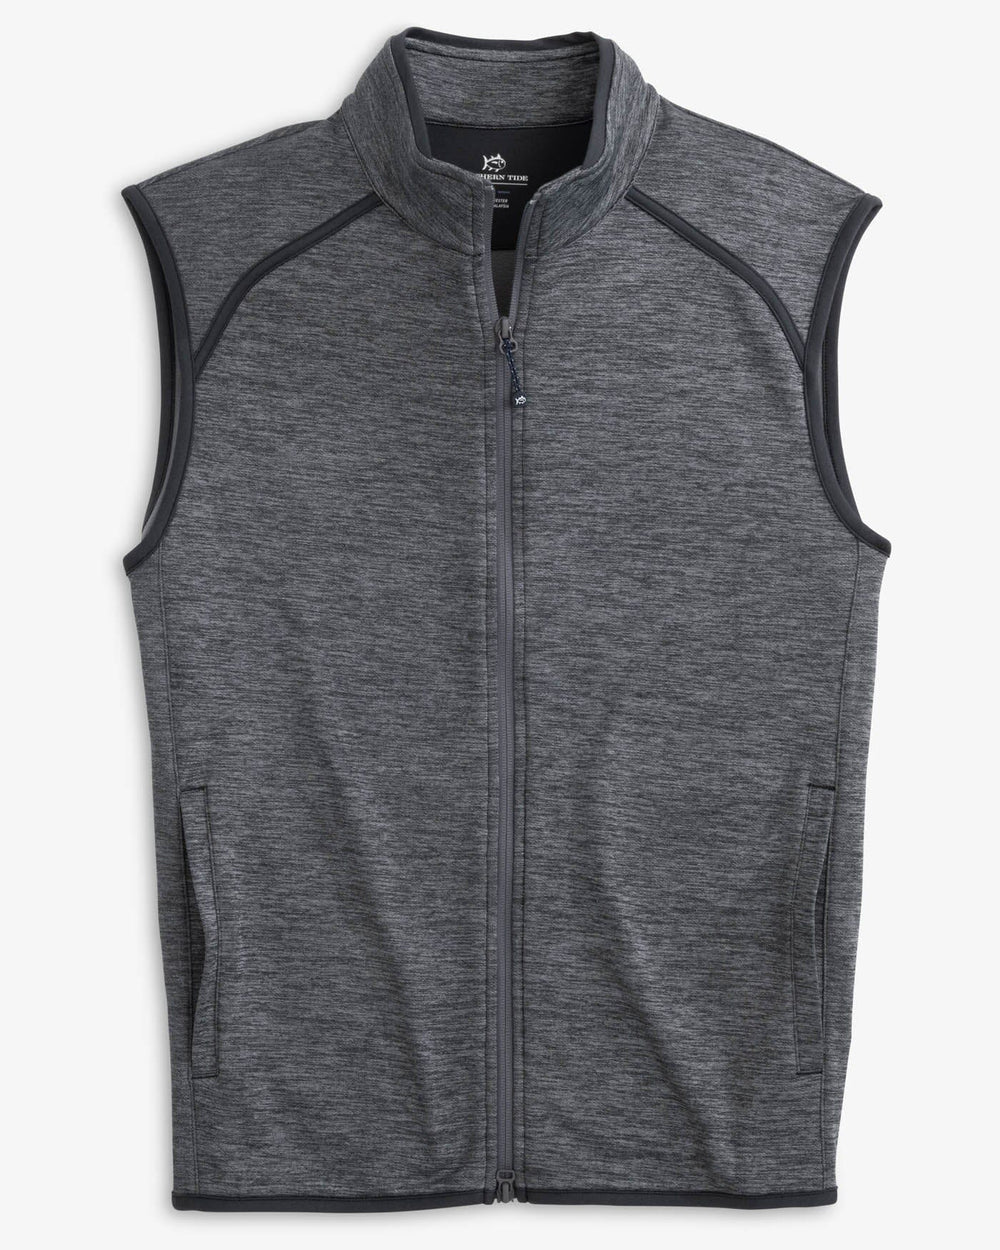 The front view of the Southern Tide Baybrook Heather Vest by Southern Tide - Heather Black